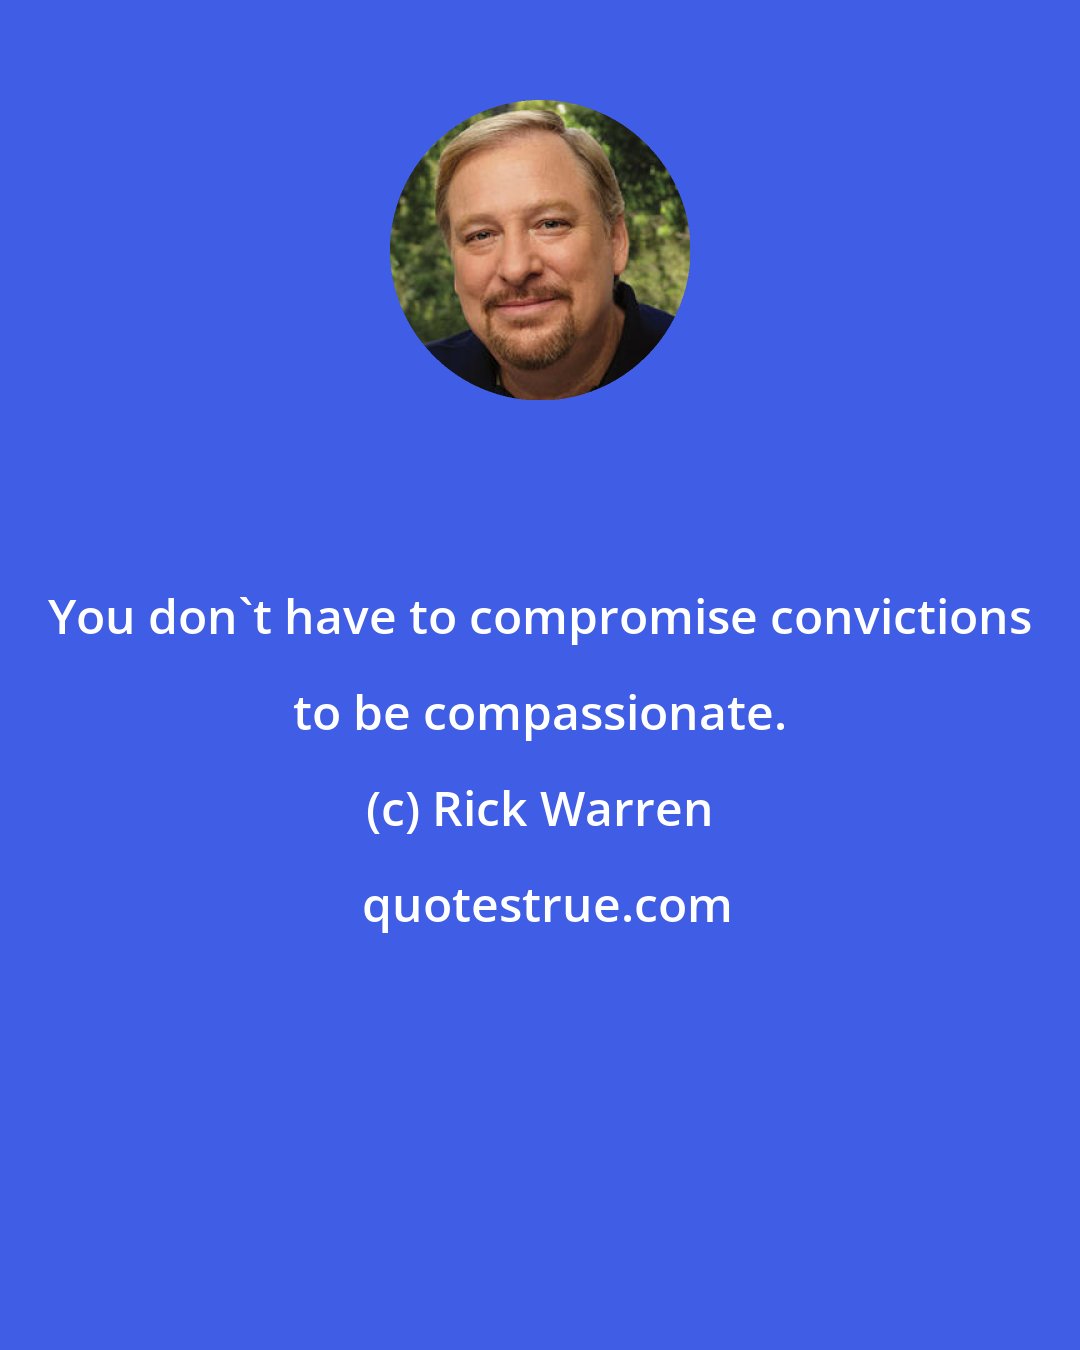 Rick Warren: You don't have to compromise convictions to be compassionate.